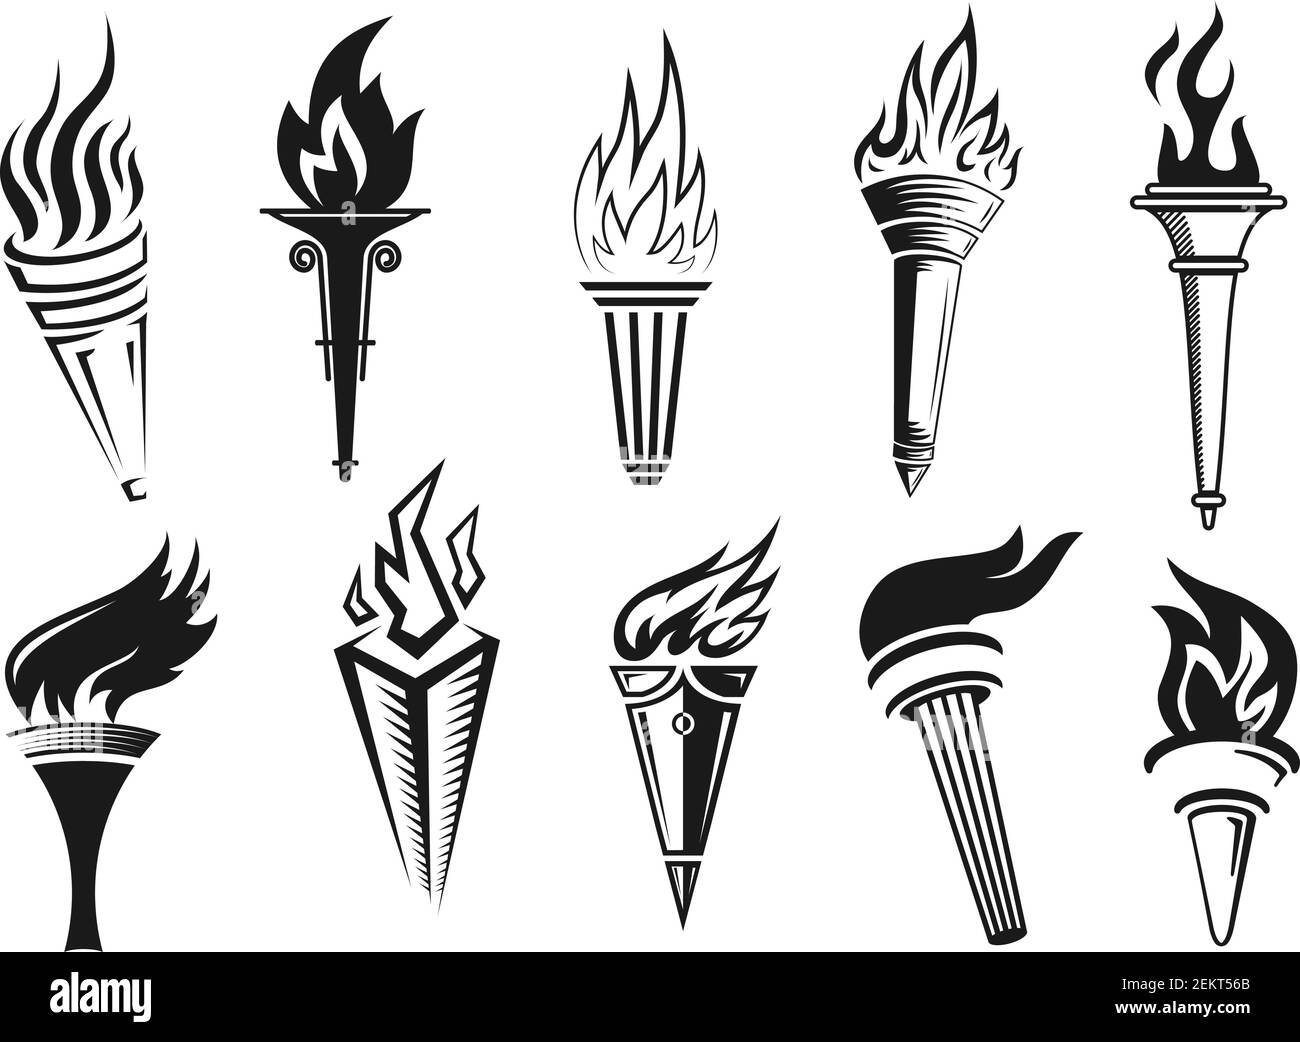 Torch flame vector symbols of victory, liberty, freedom and triumph. Burning torches with bright fire, medieval and modern handles, sport competition Stock Vector